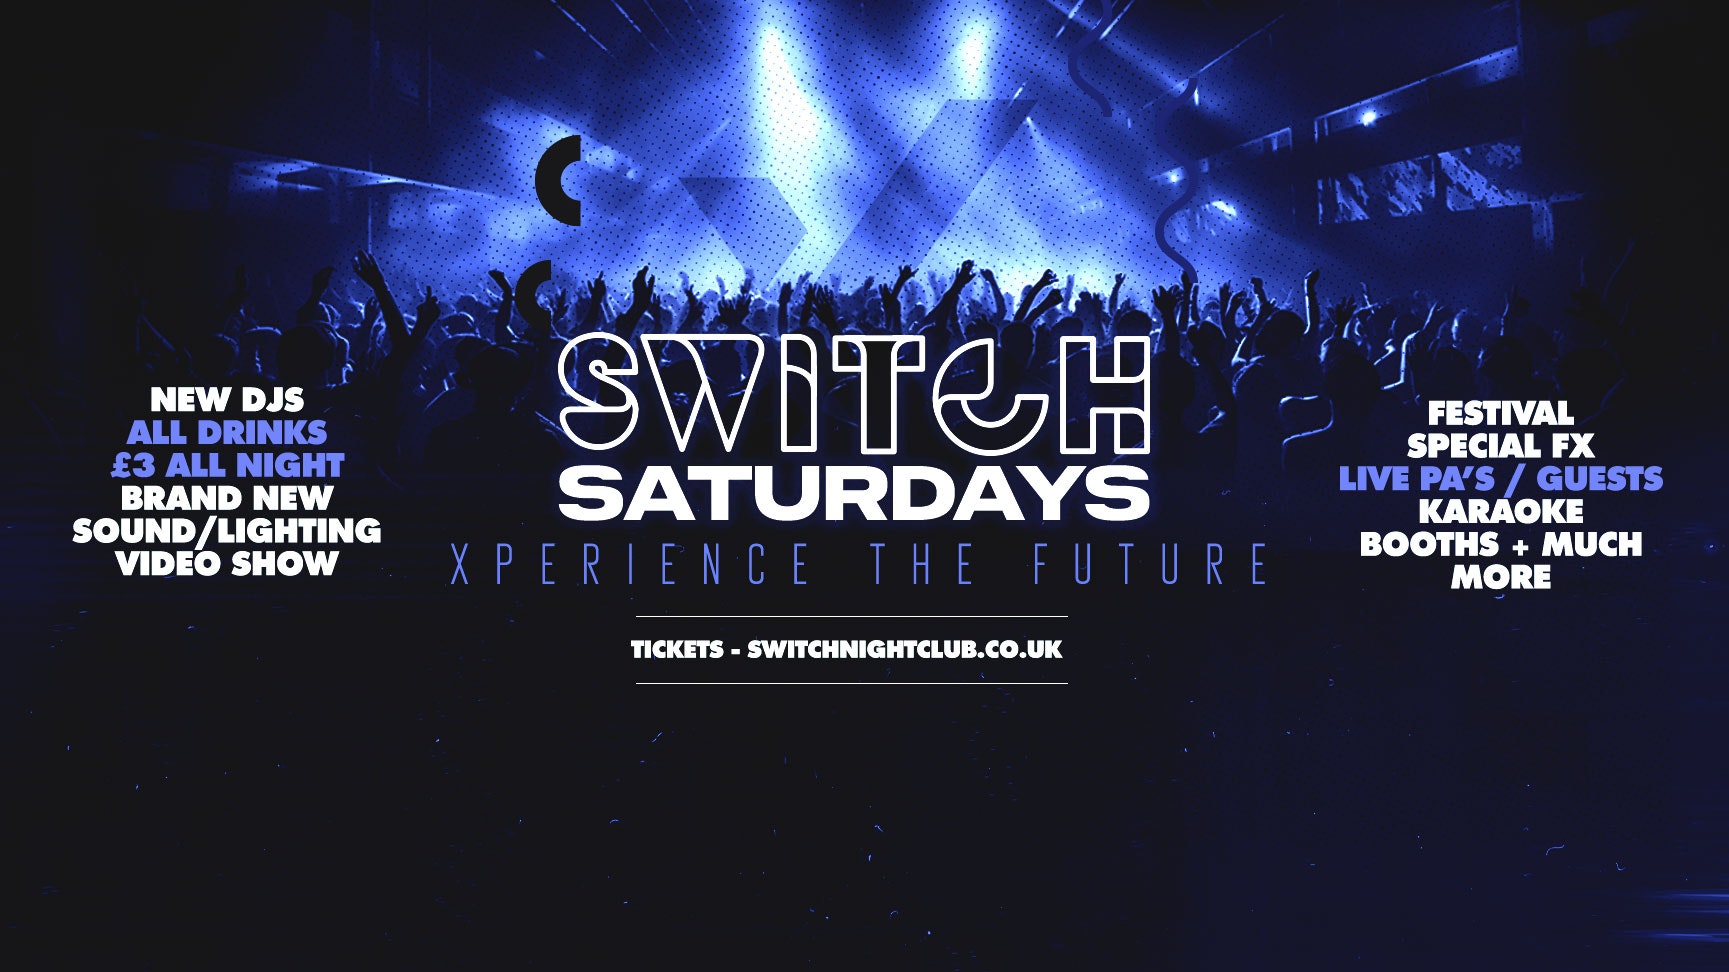 SWITCH Saturdays | Xperience The Future | ALL DRINKS £3 ALL NIGHT